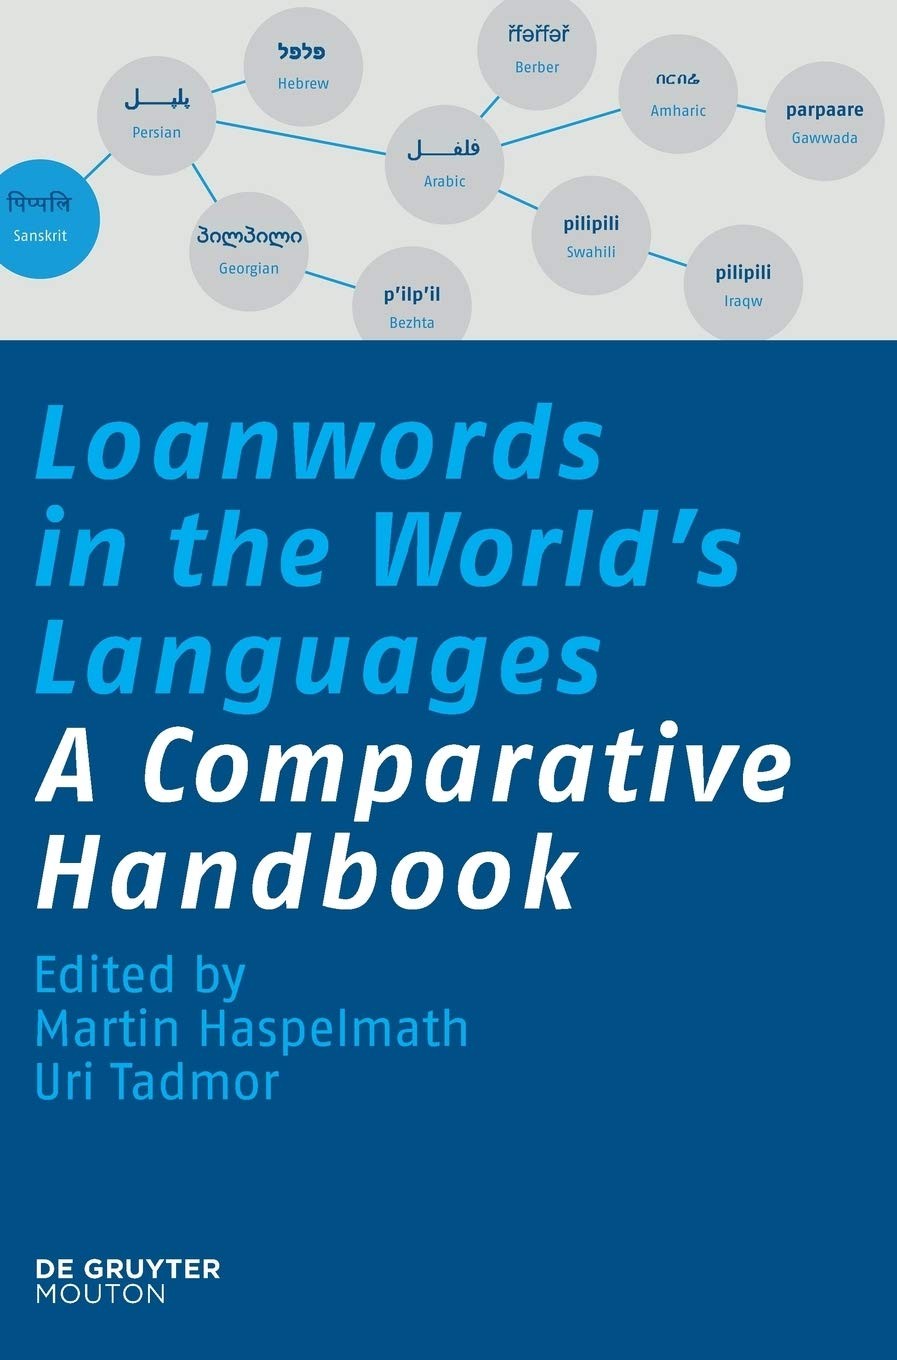 Loanwords in the World's Languages: A Comparative Handbook